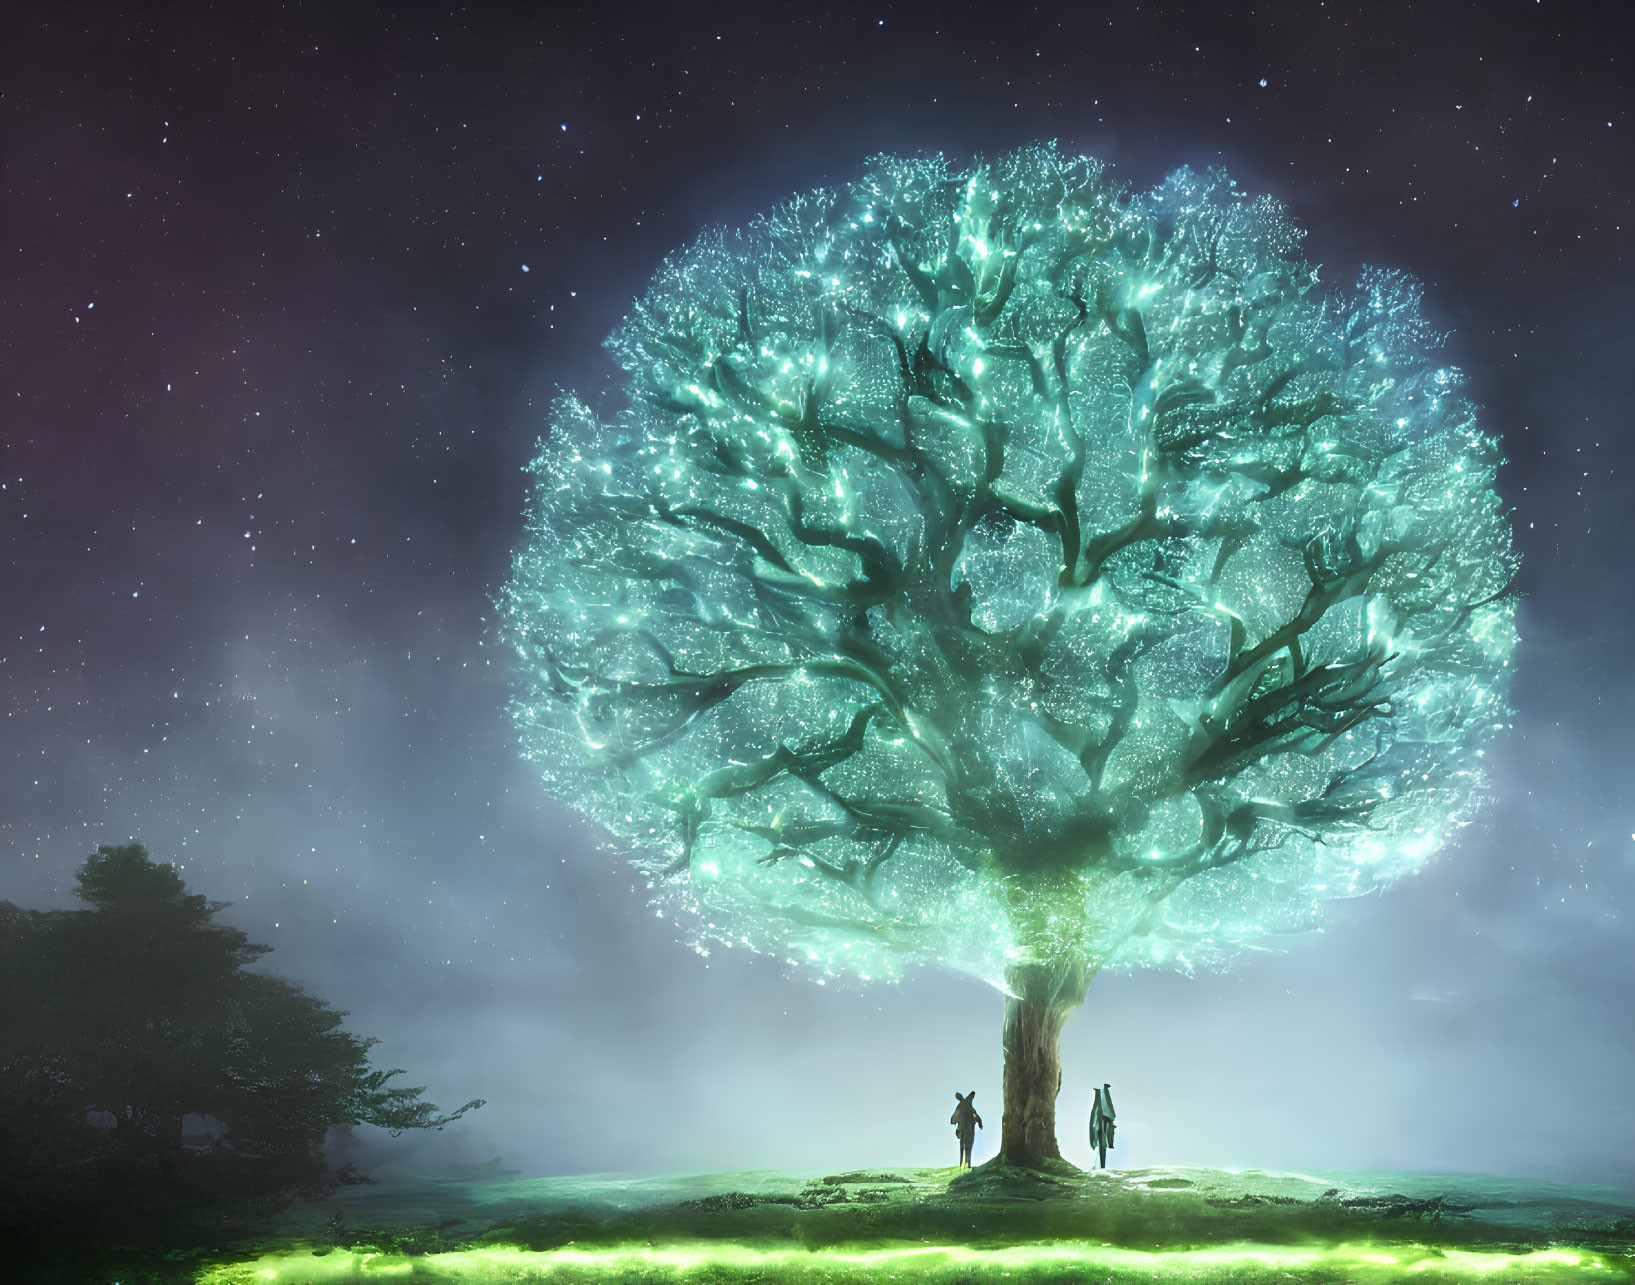 Glowing tree and silhouetted figures under starry sky